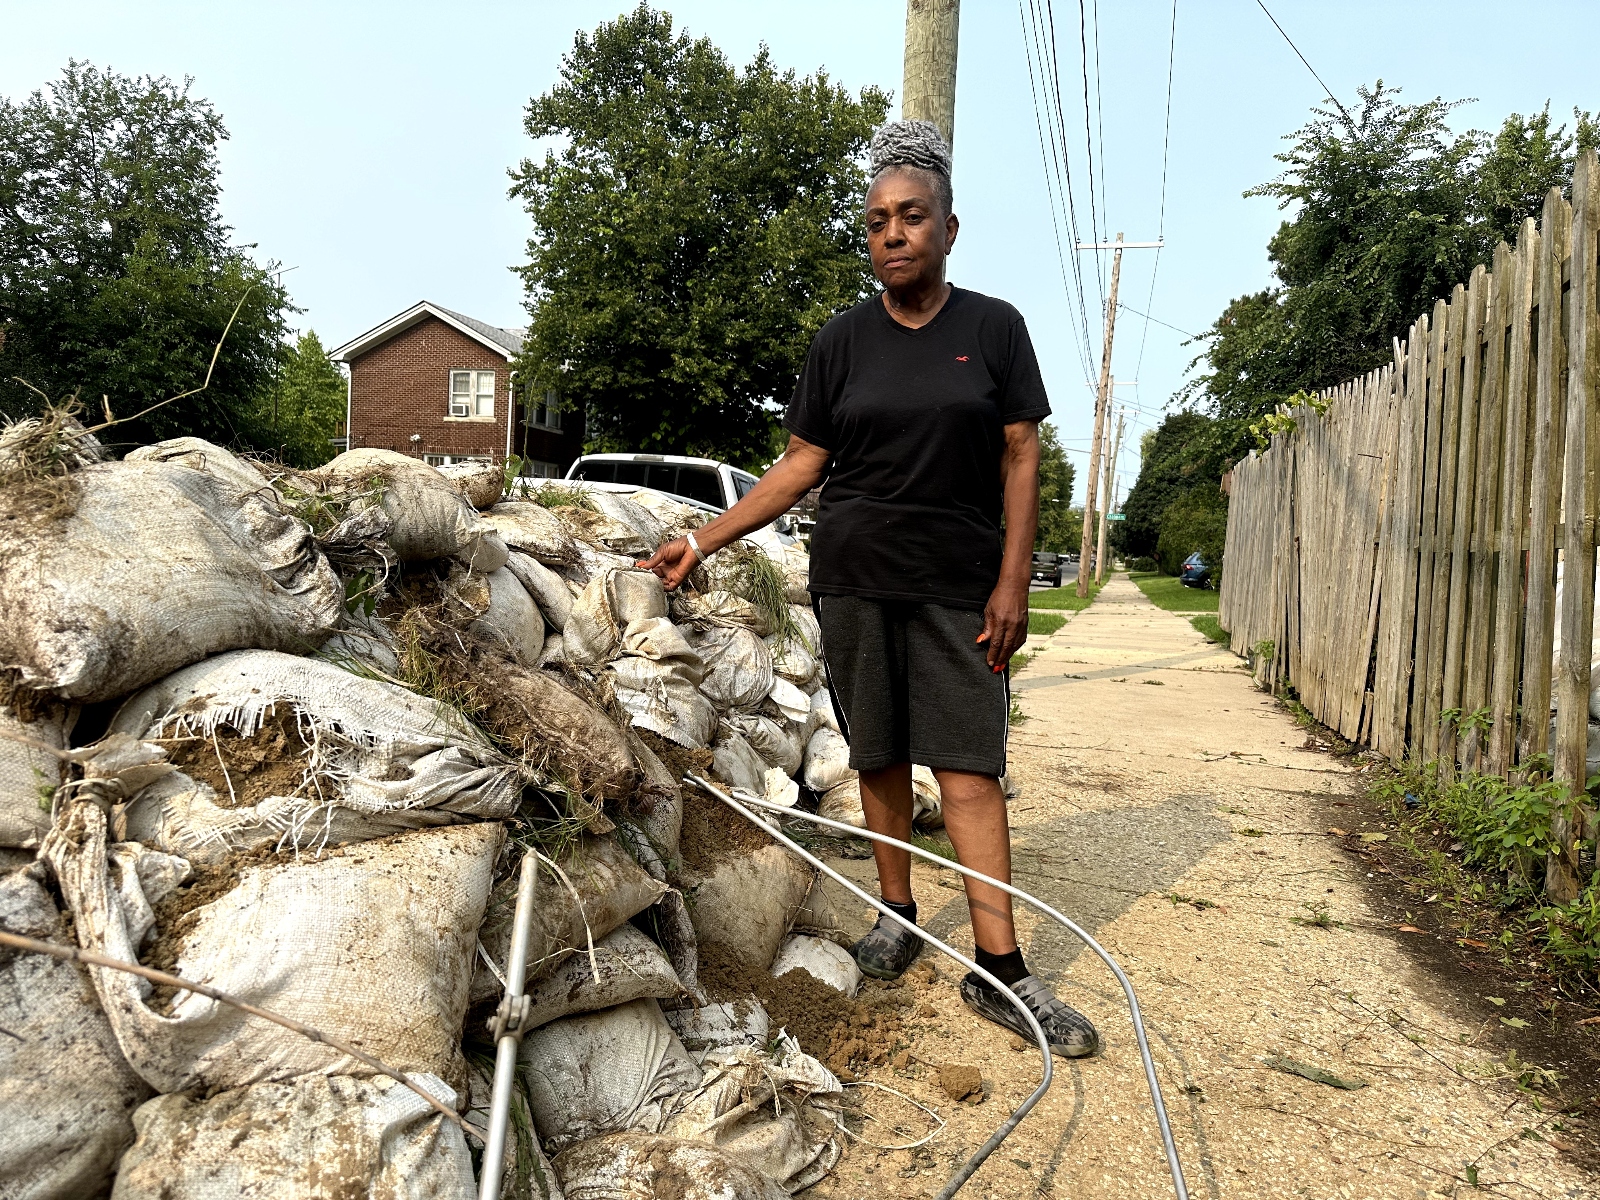 Wilma Price standing by sandbags Detroit installed to prevent flooding, which did not work